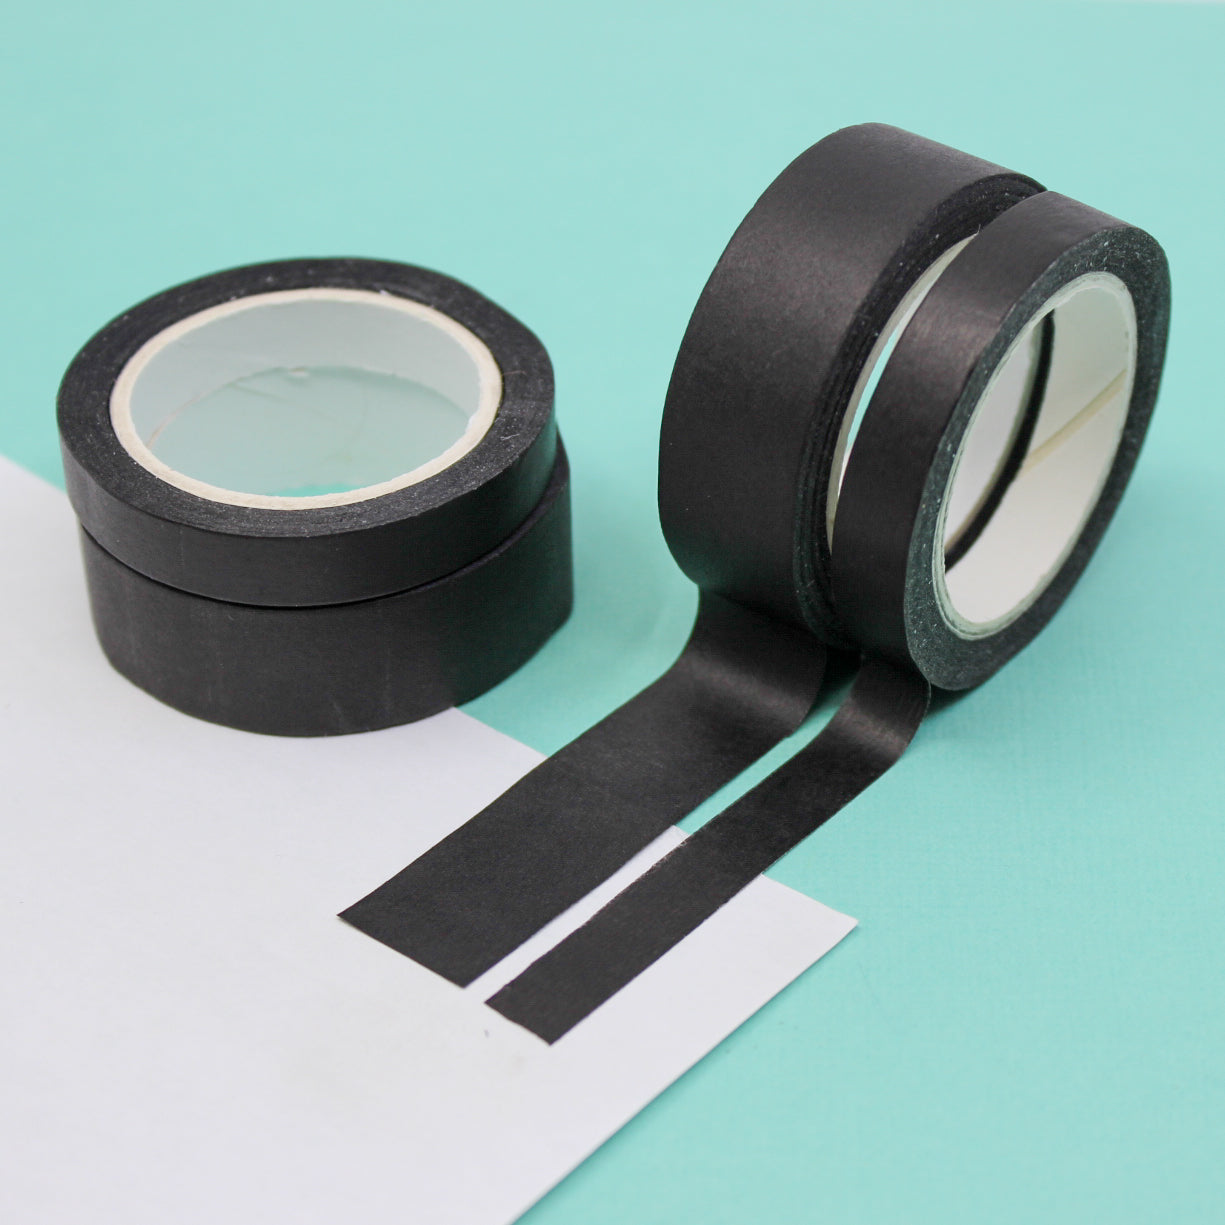 This neutral black solid washi tape is vibrant and fun. This washi tape is part of our solid neon thick-thin matching duo washi collection. Find the perfect color for any project in BBB Supplies' thick-thin solids collection, from neon to neutral to pastel and more. This tape is sold at BBB Supplies Craft Shop.